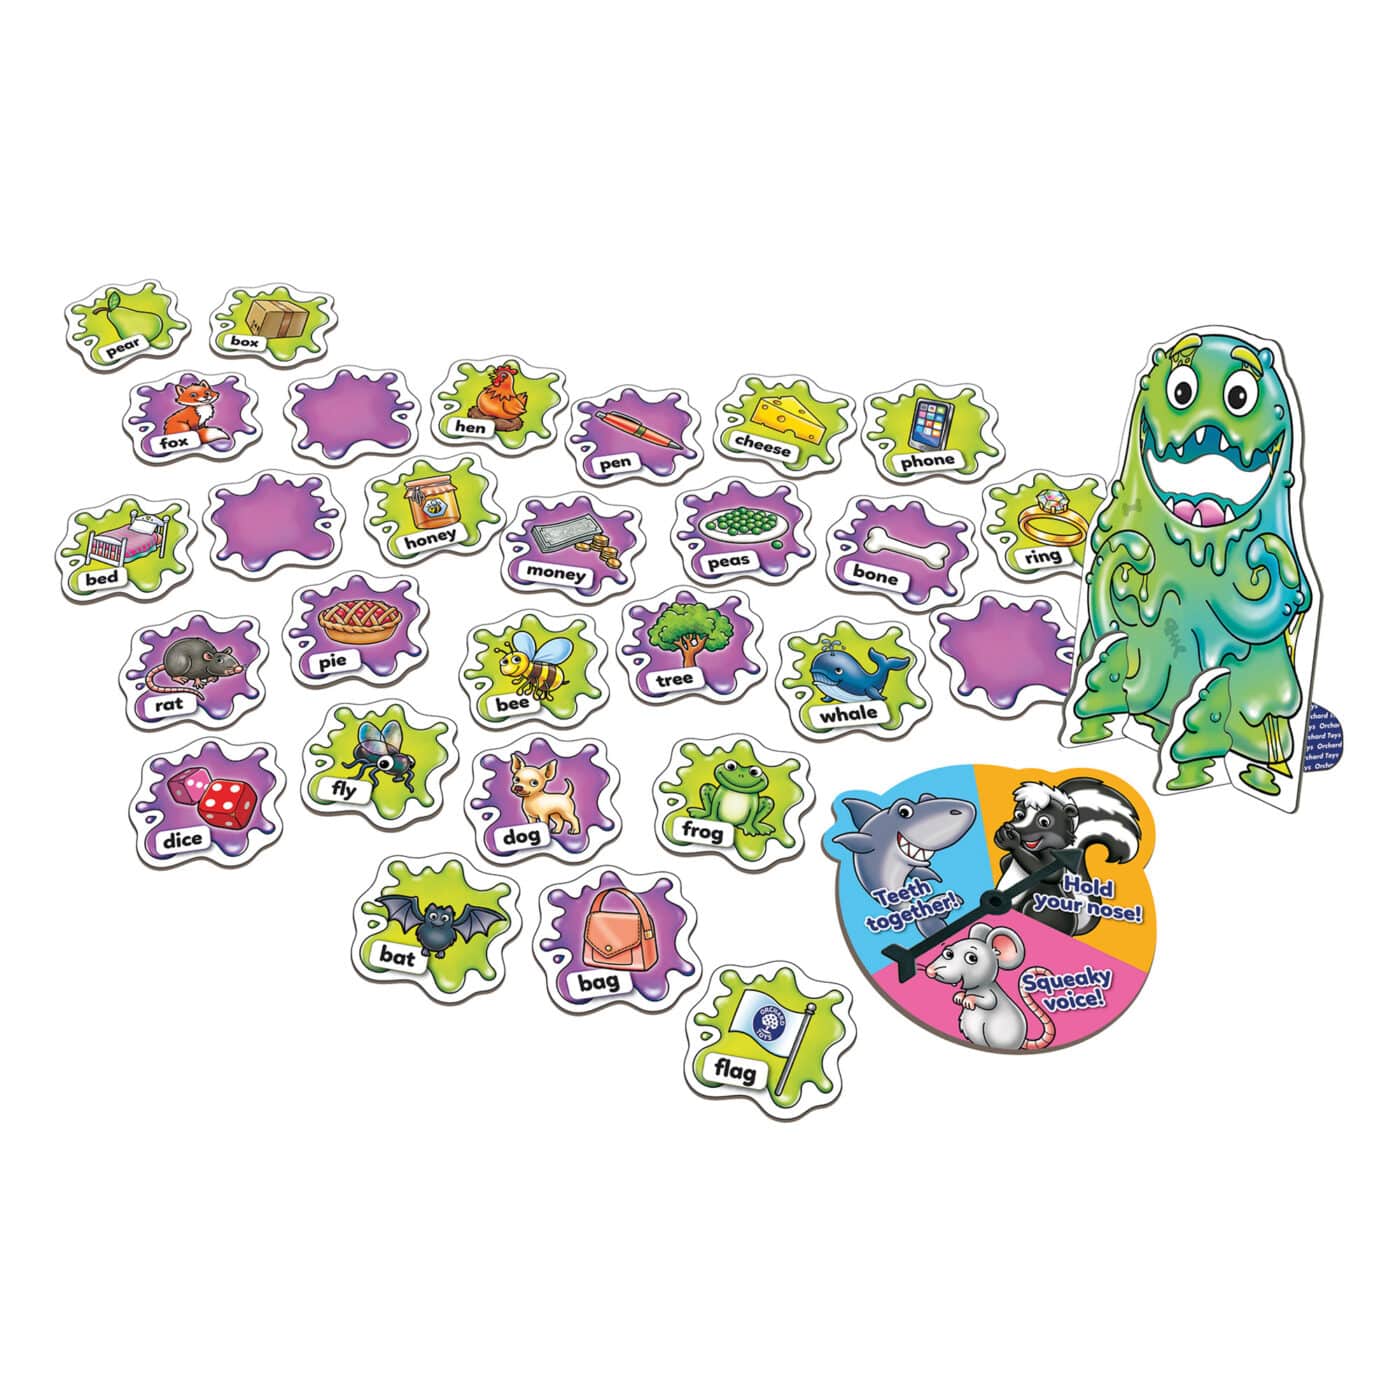 Orchard Toys Slimy Rhymes Game